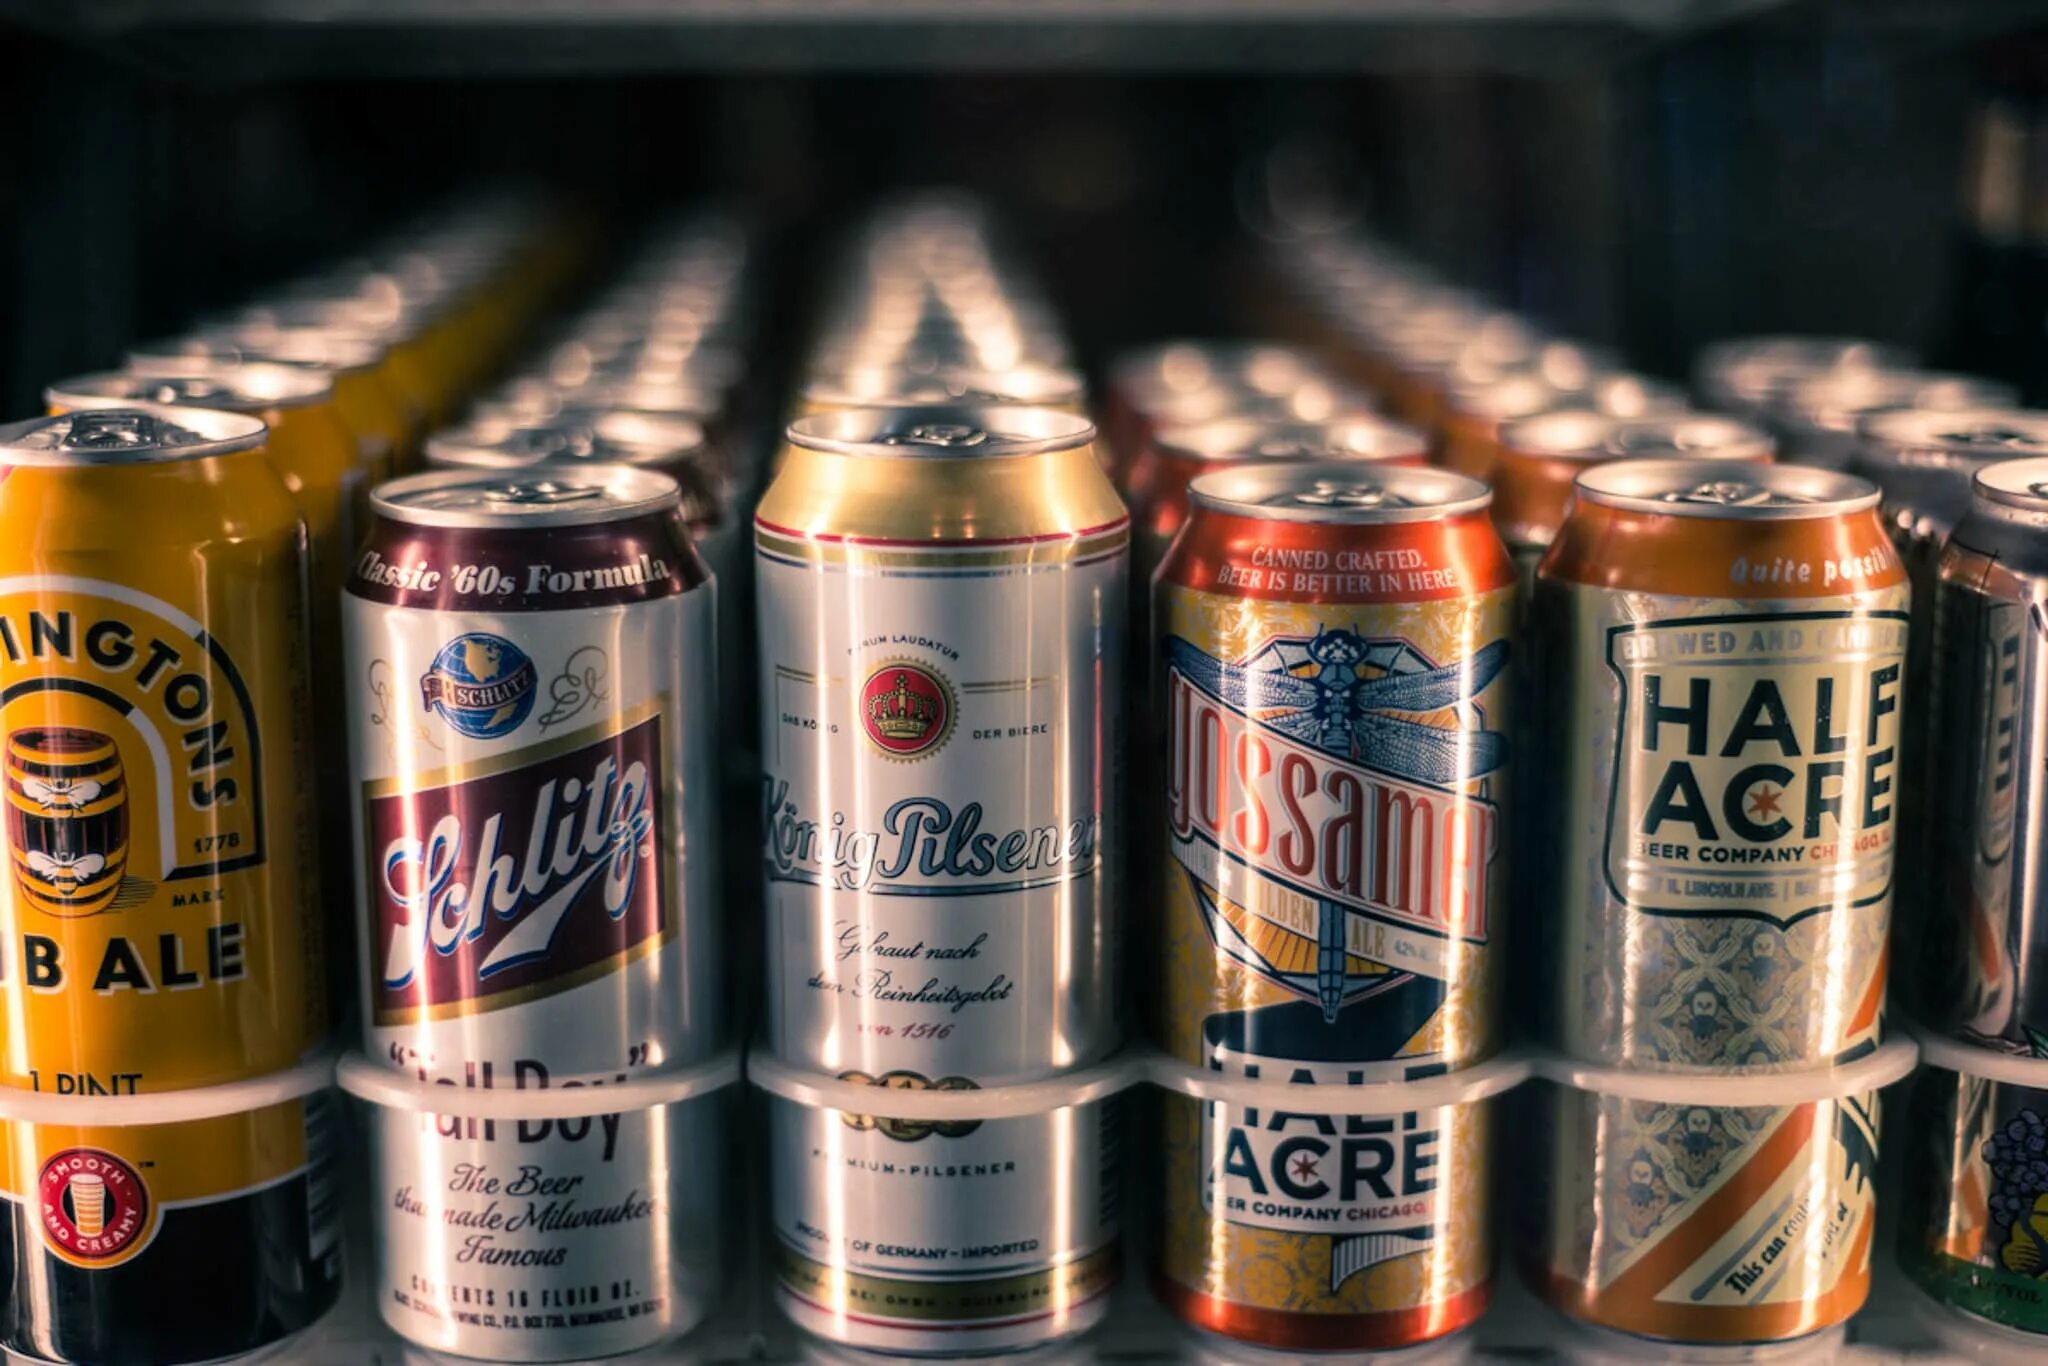 Beer can. Could пиво. Beer. Canned beer